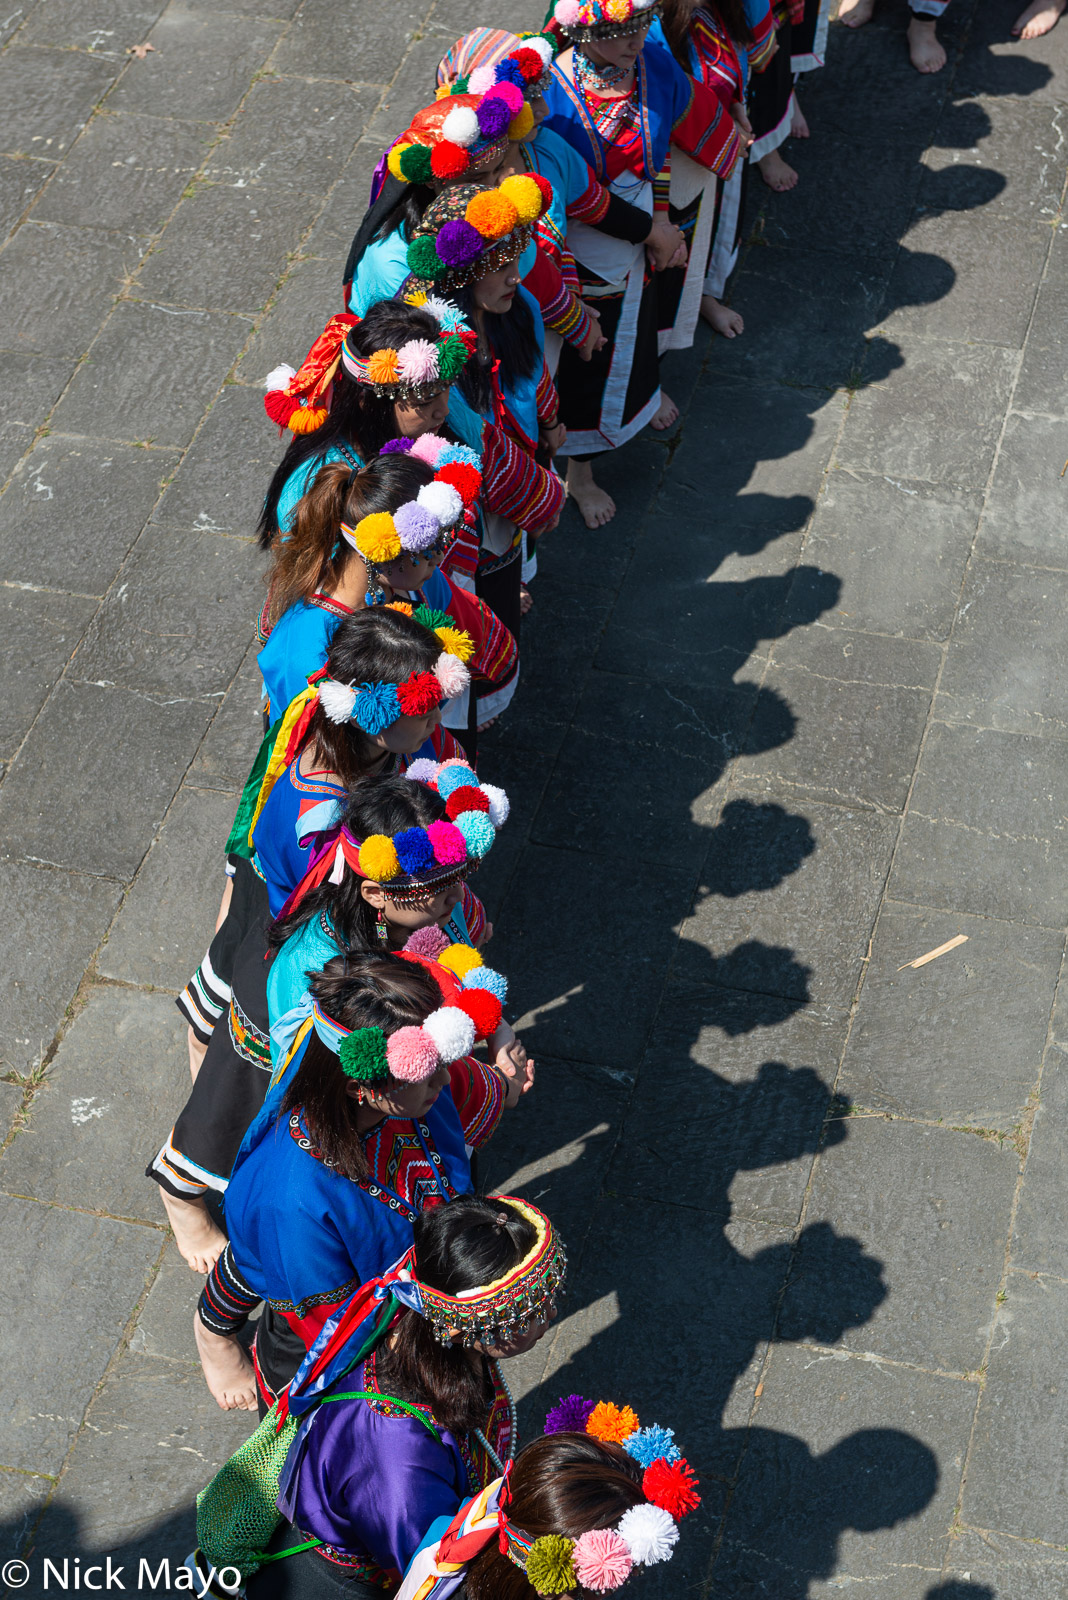 Pom pom shadows on the paving during the women's dance at the Tsou Mayasvi festival in Tefuye.